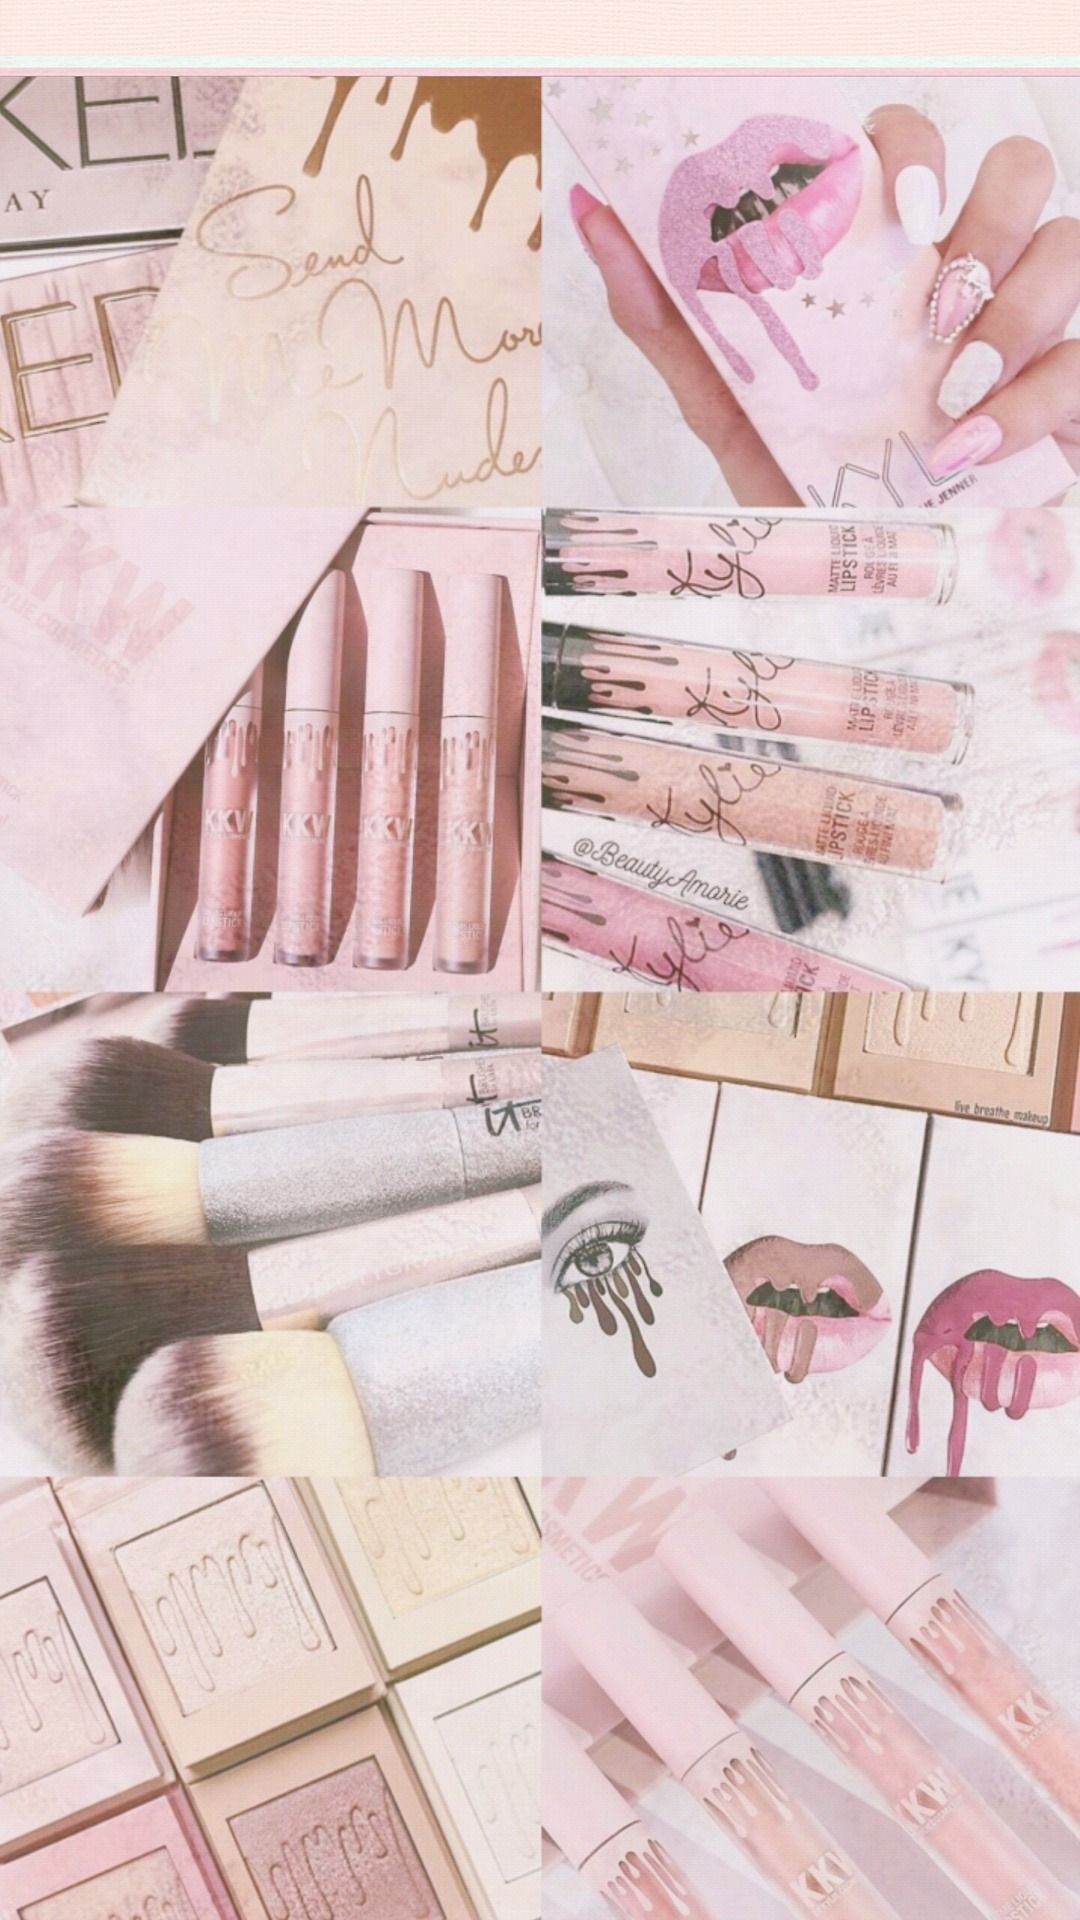 A collage of photos of kylie Jenner's makeup - Nails, blush, makeup